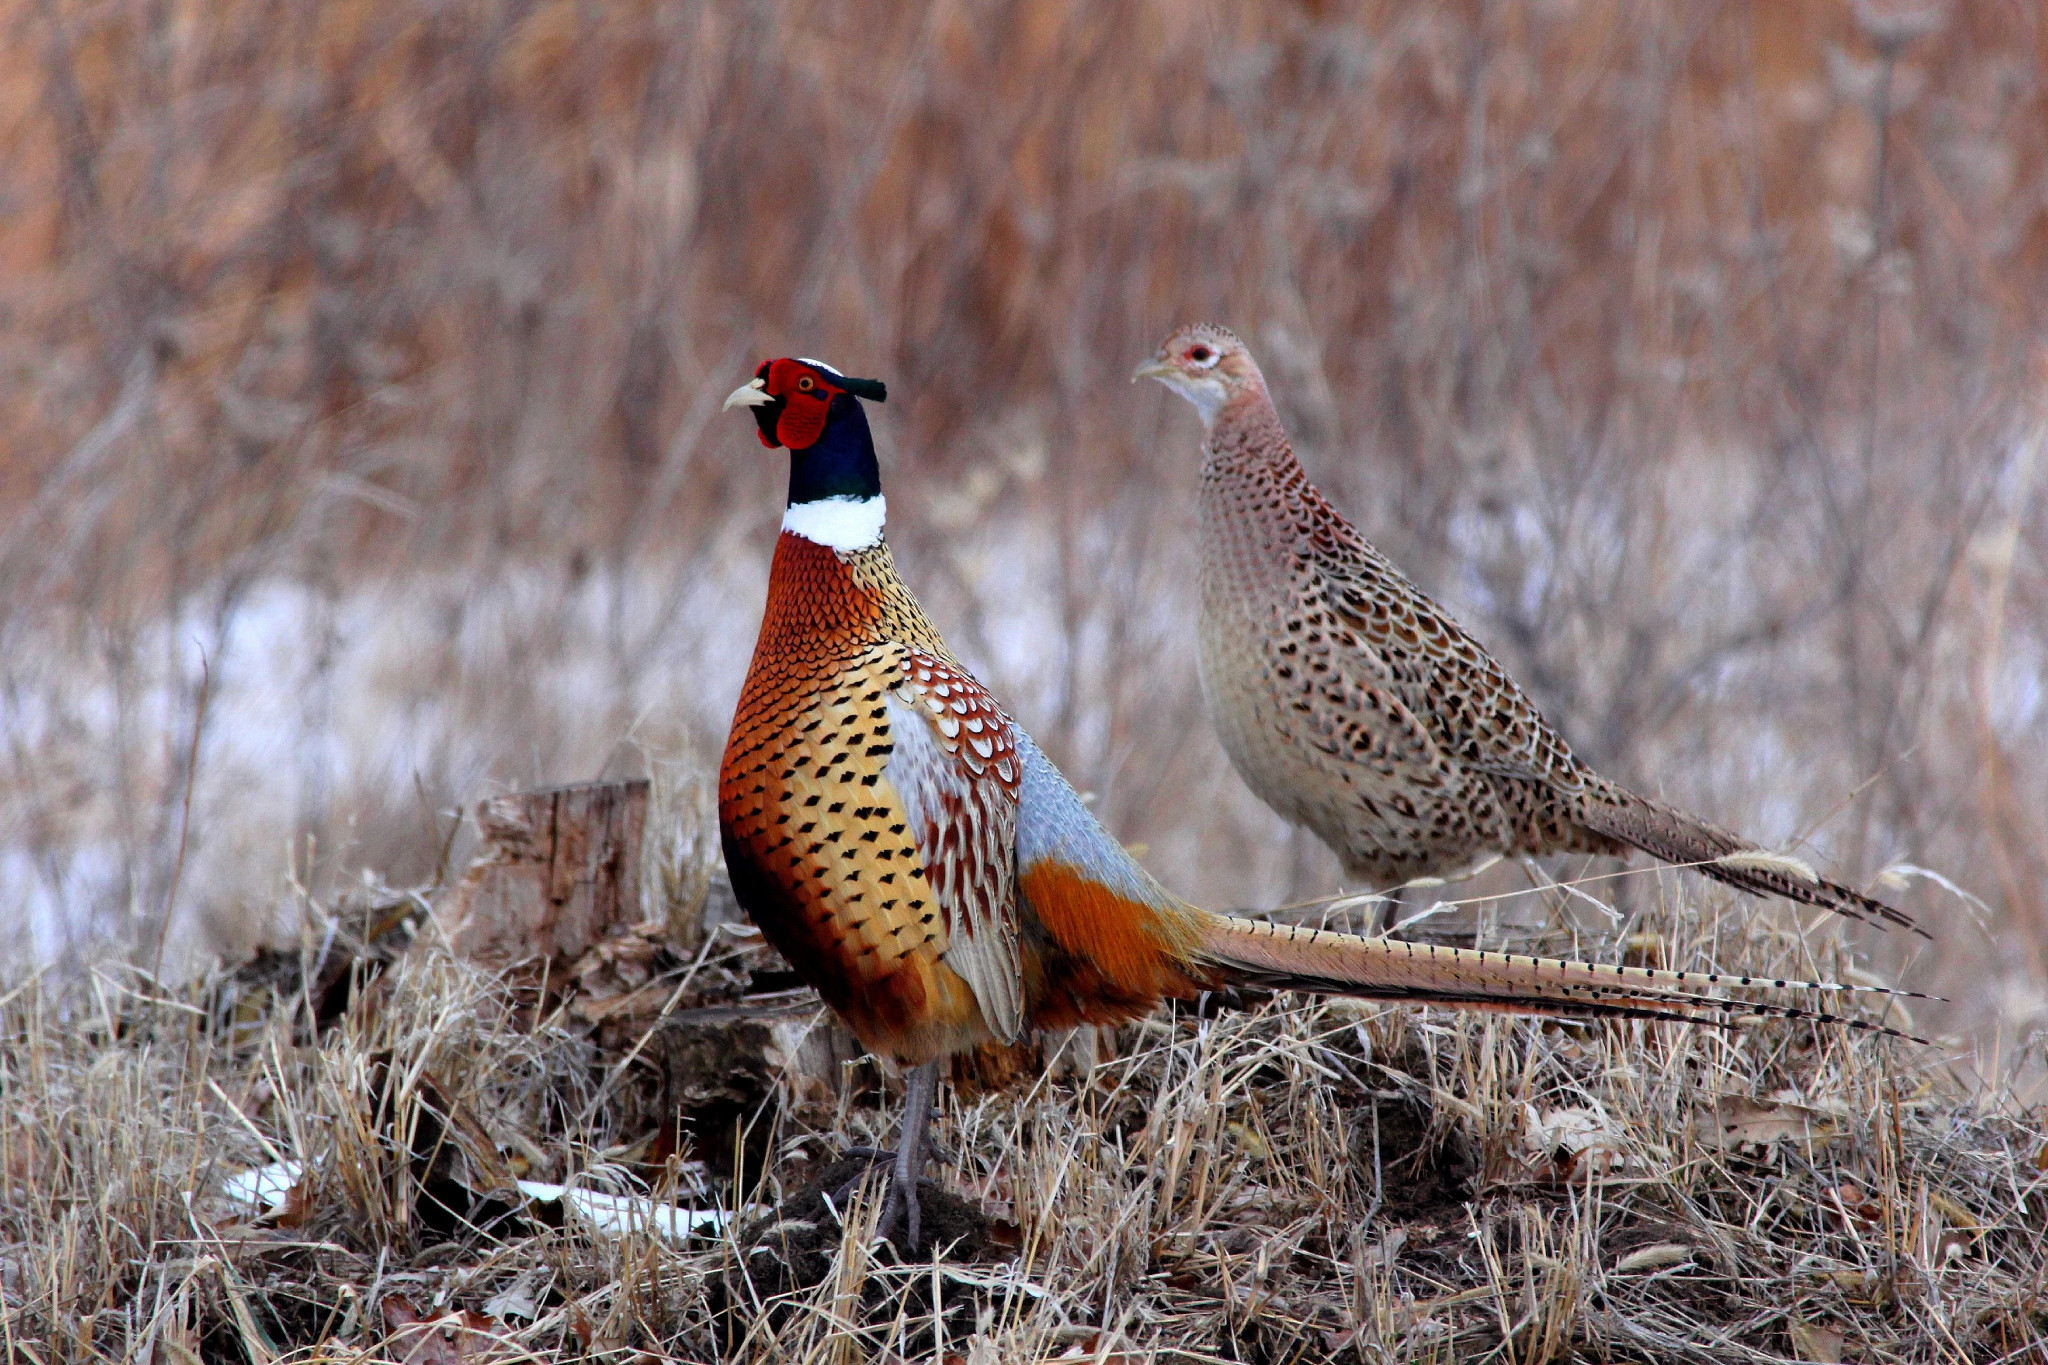 A photo of two pheasants in a field